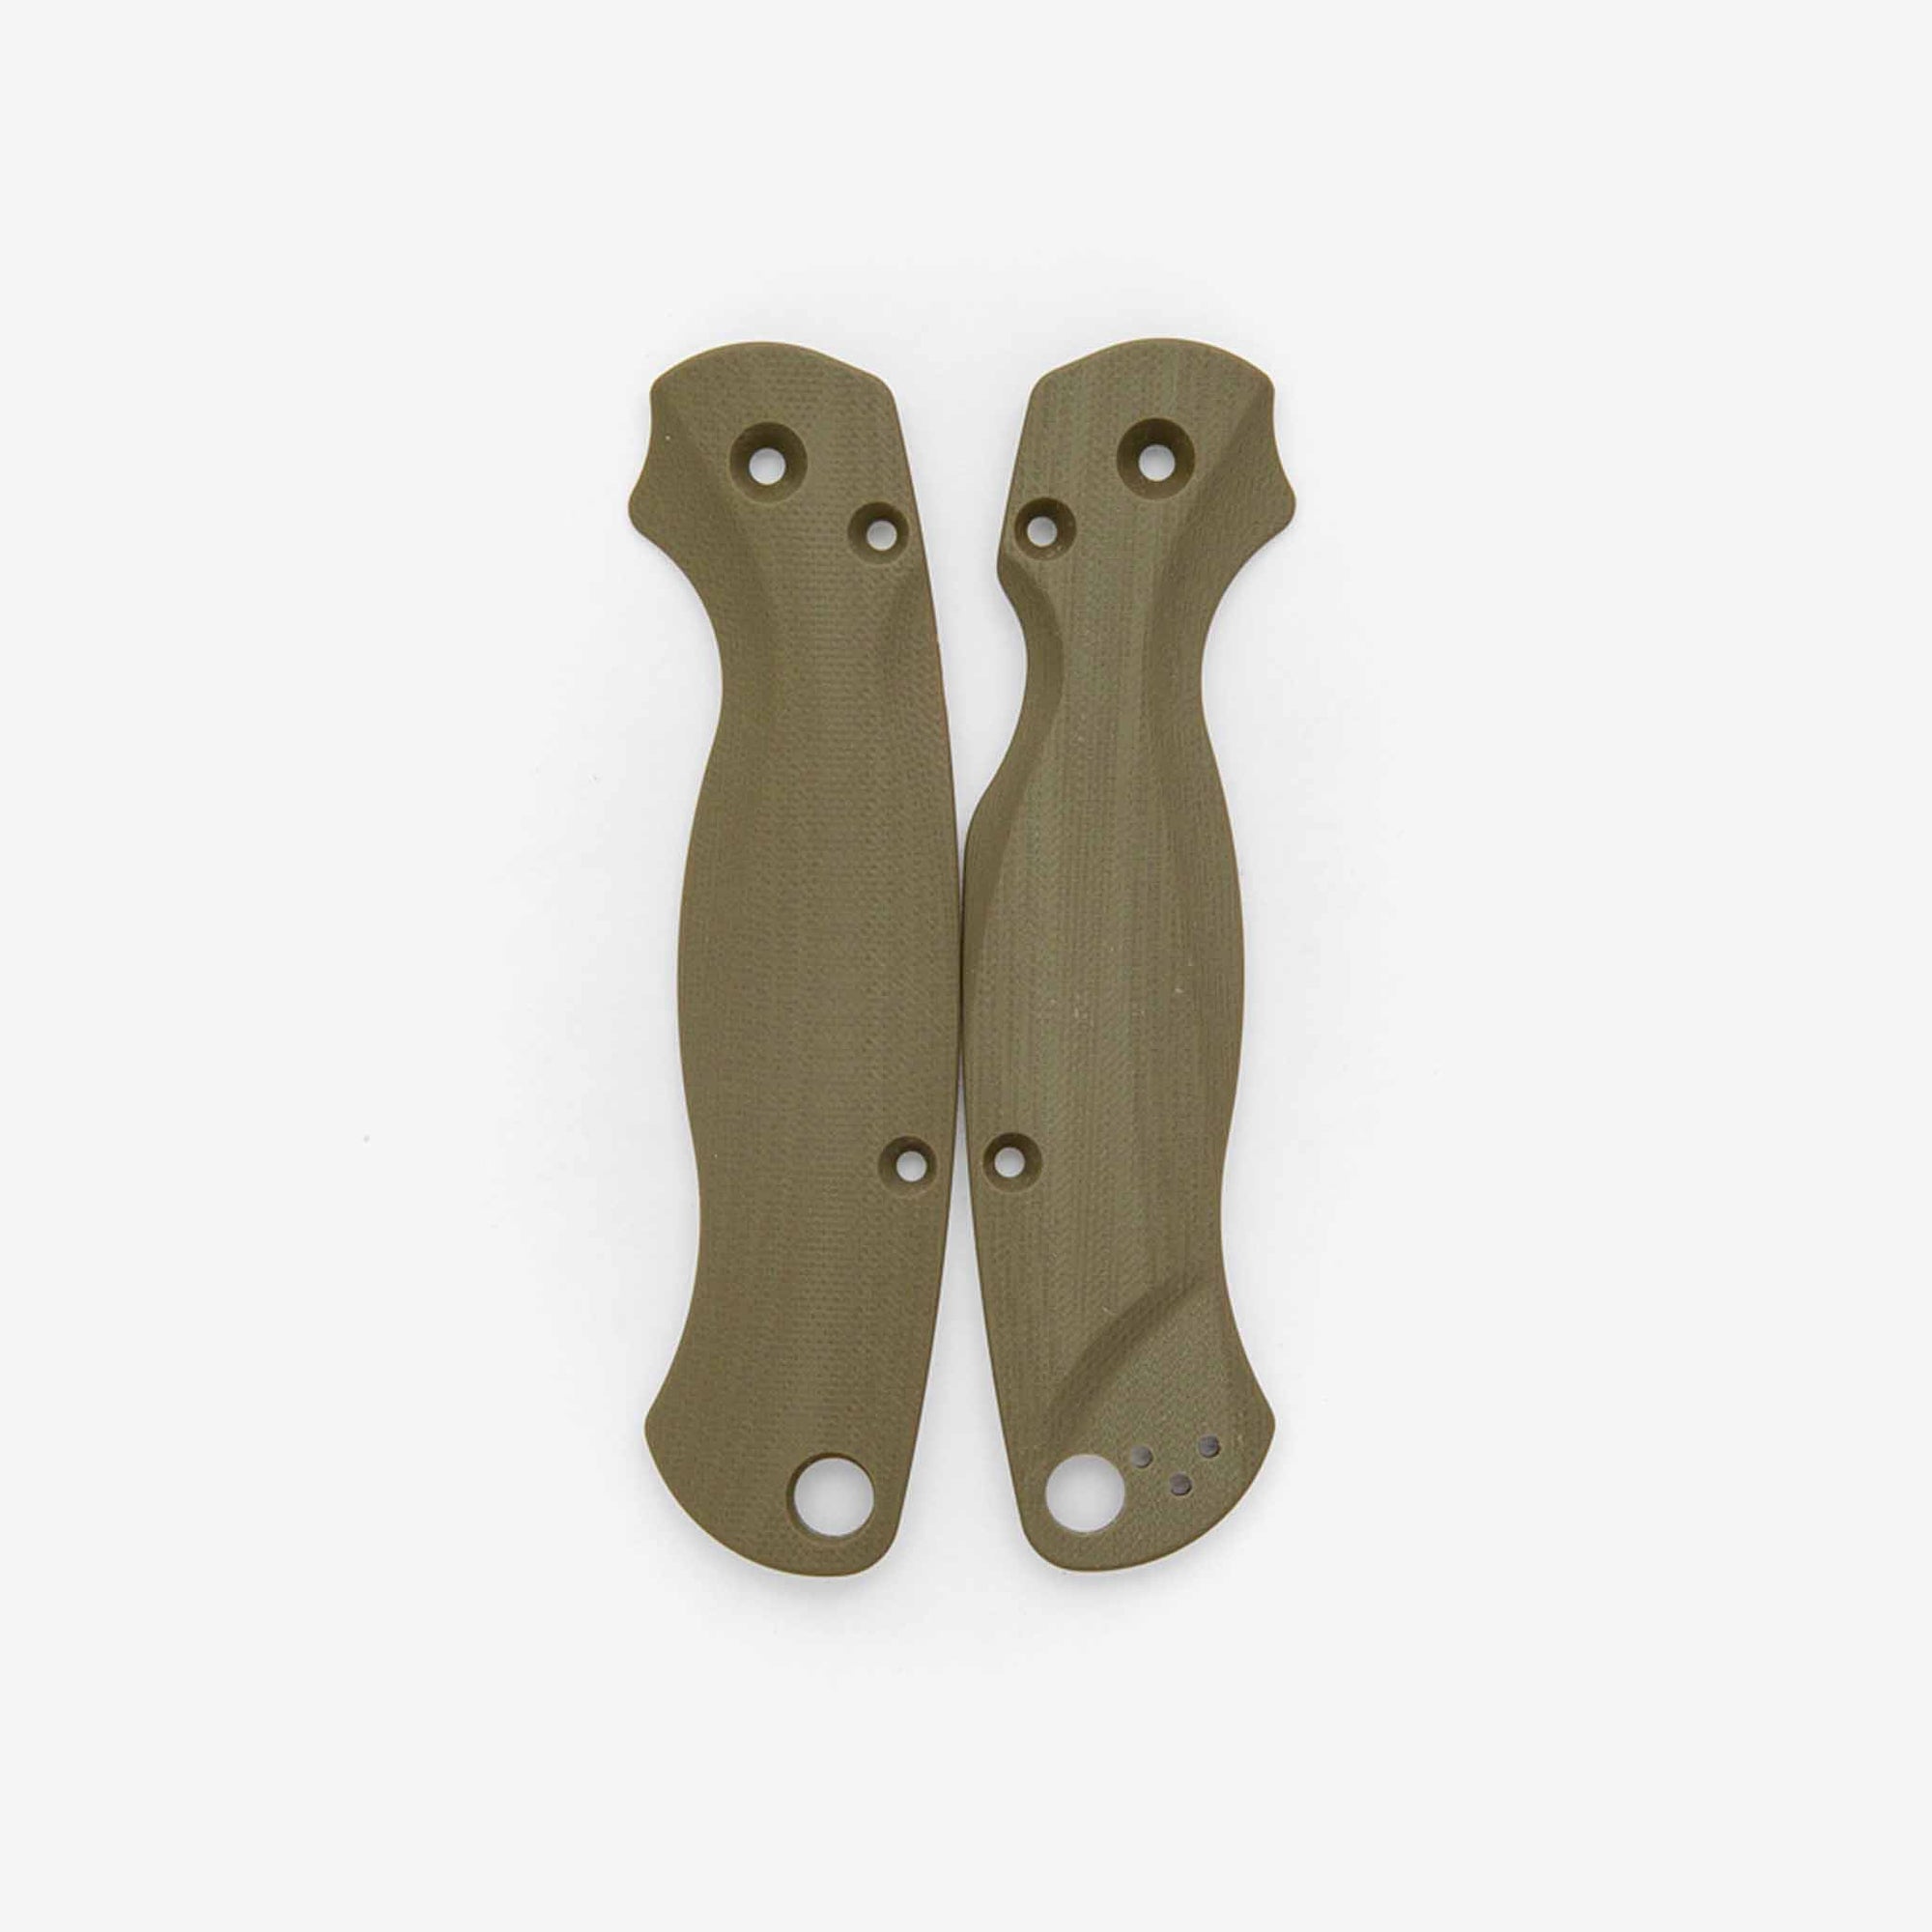 G-10 Lotus scales for the Spyderco Paramilitary 2 knife in the color OD Green